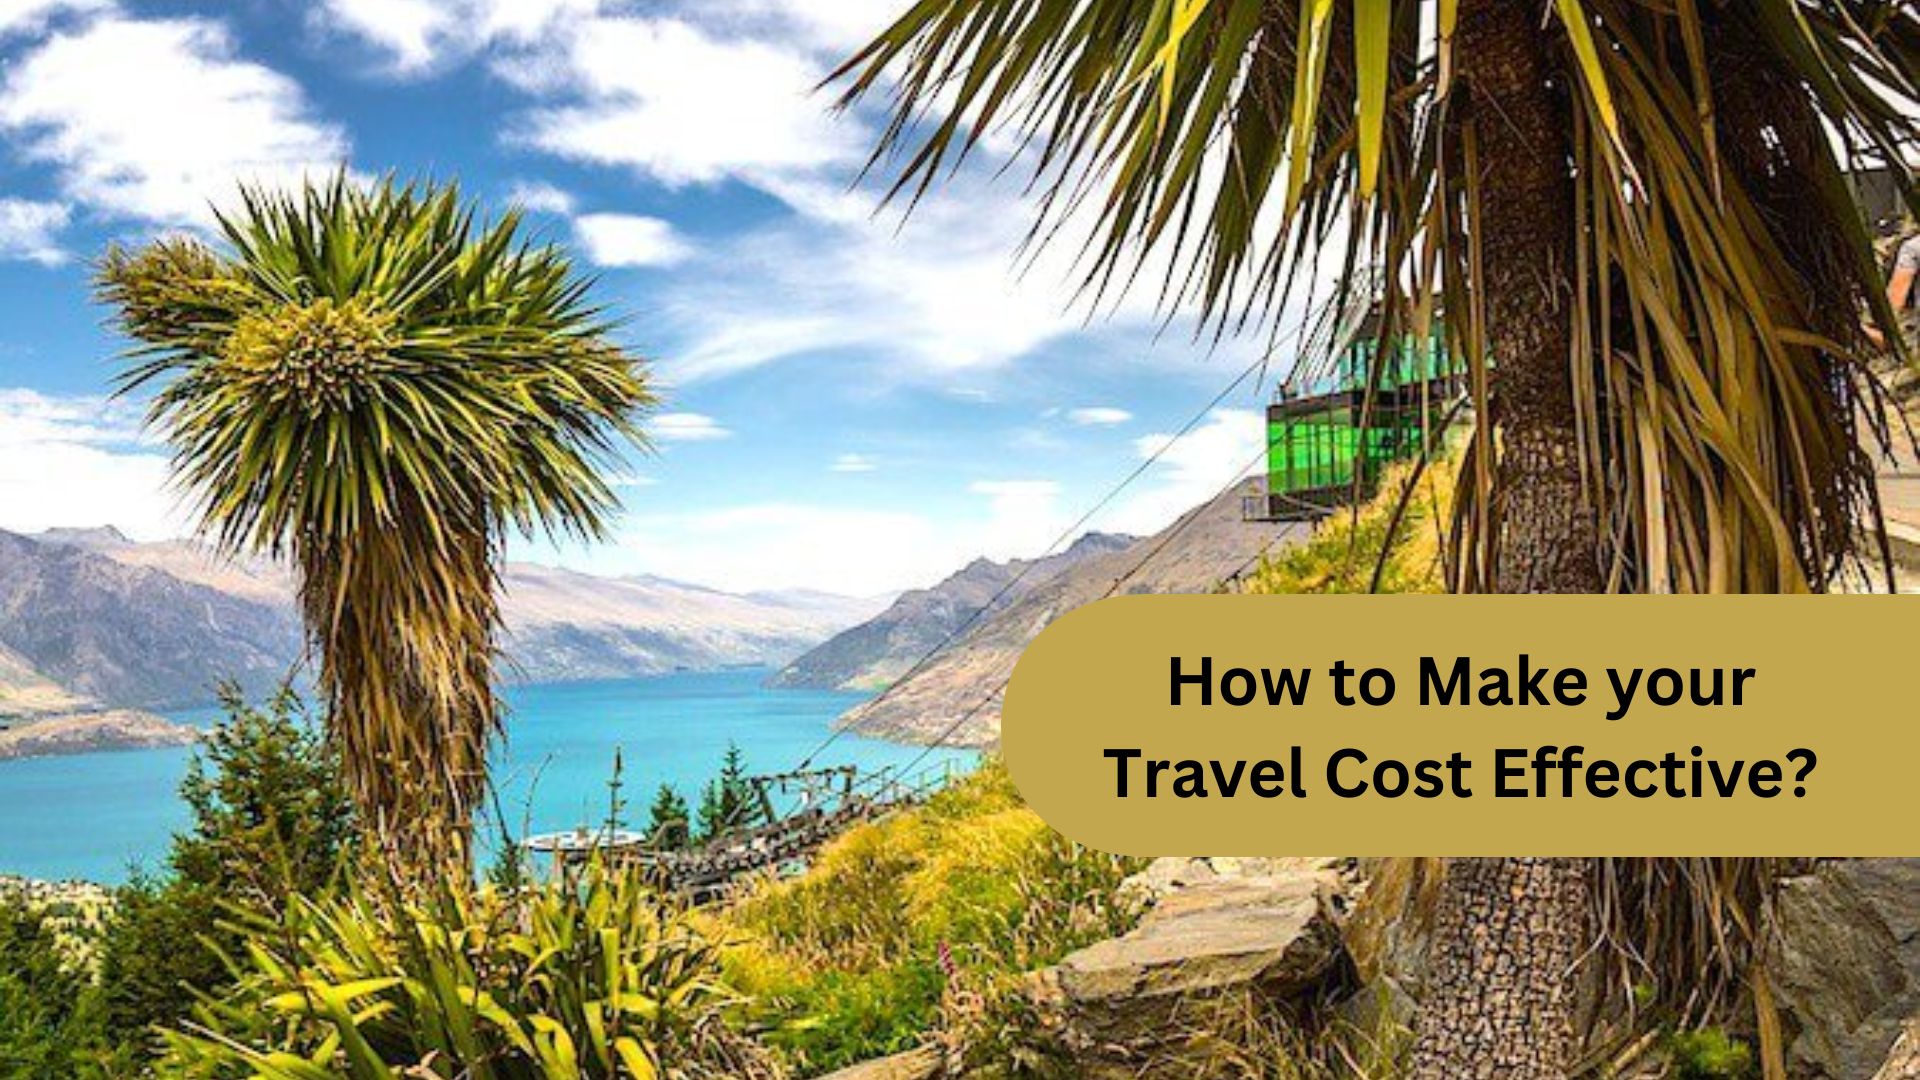 How to Make your Travel Cost Effective